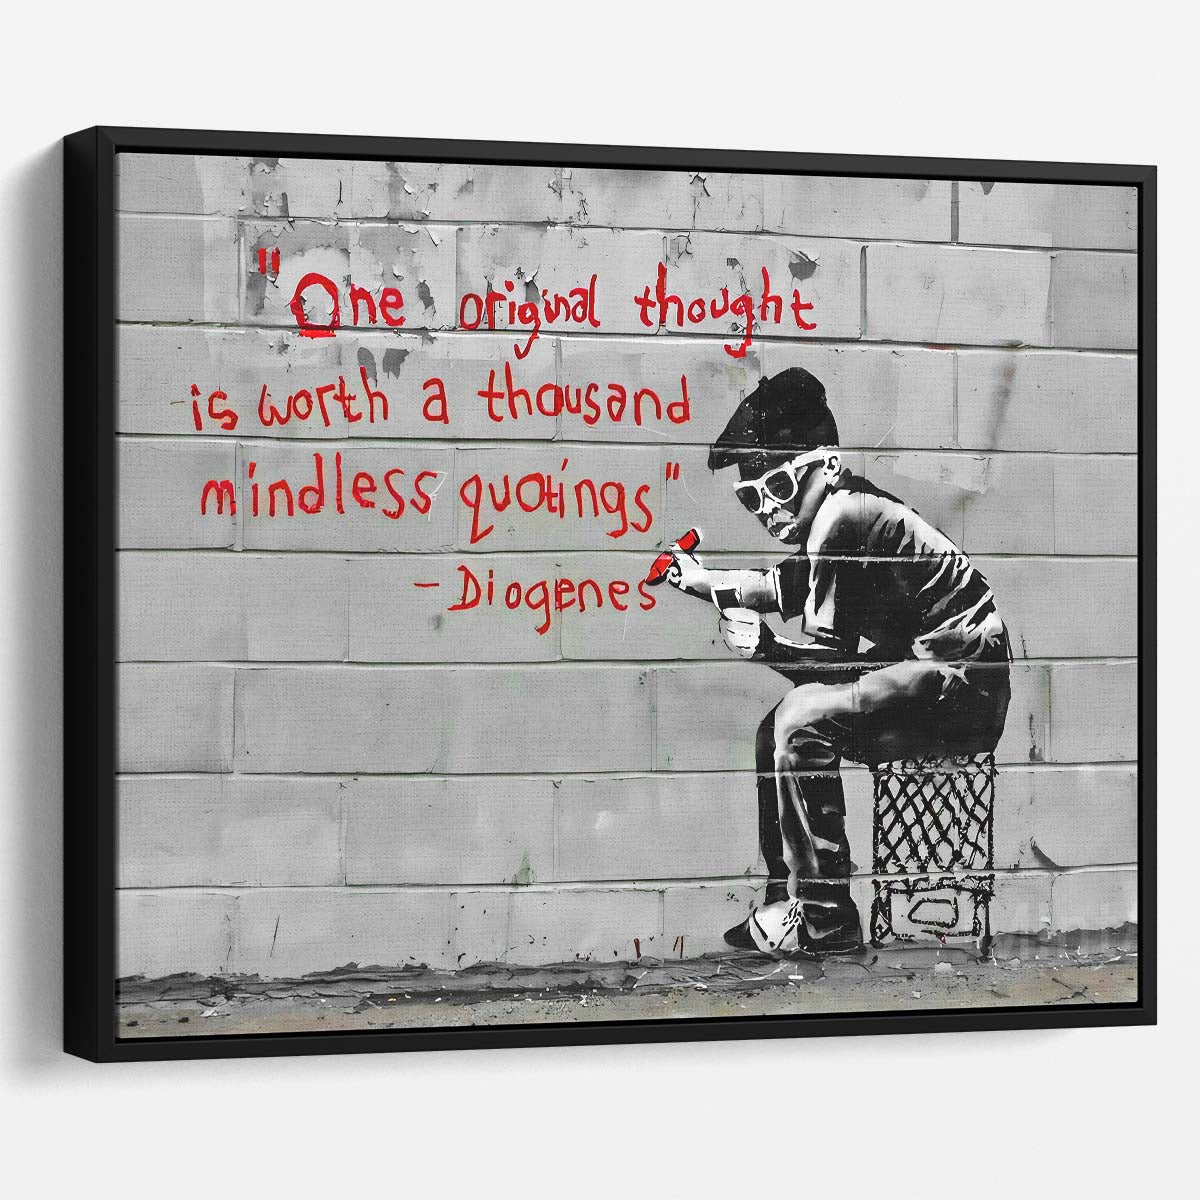 Banksy One Original Thought Wall Art by Luxuriance Designs. Made in USA.